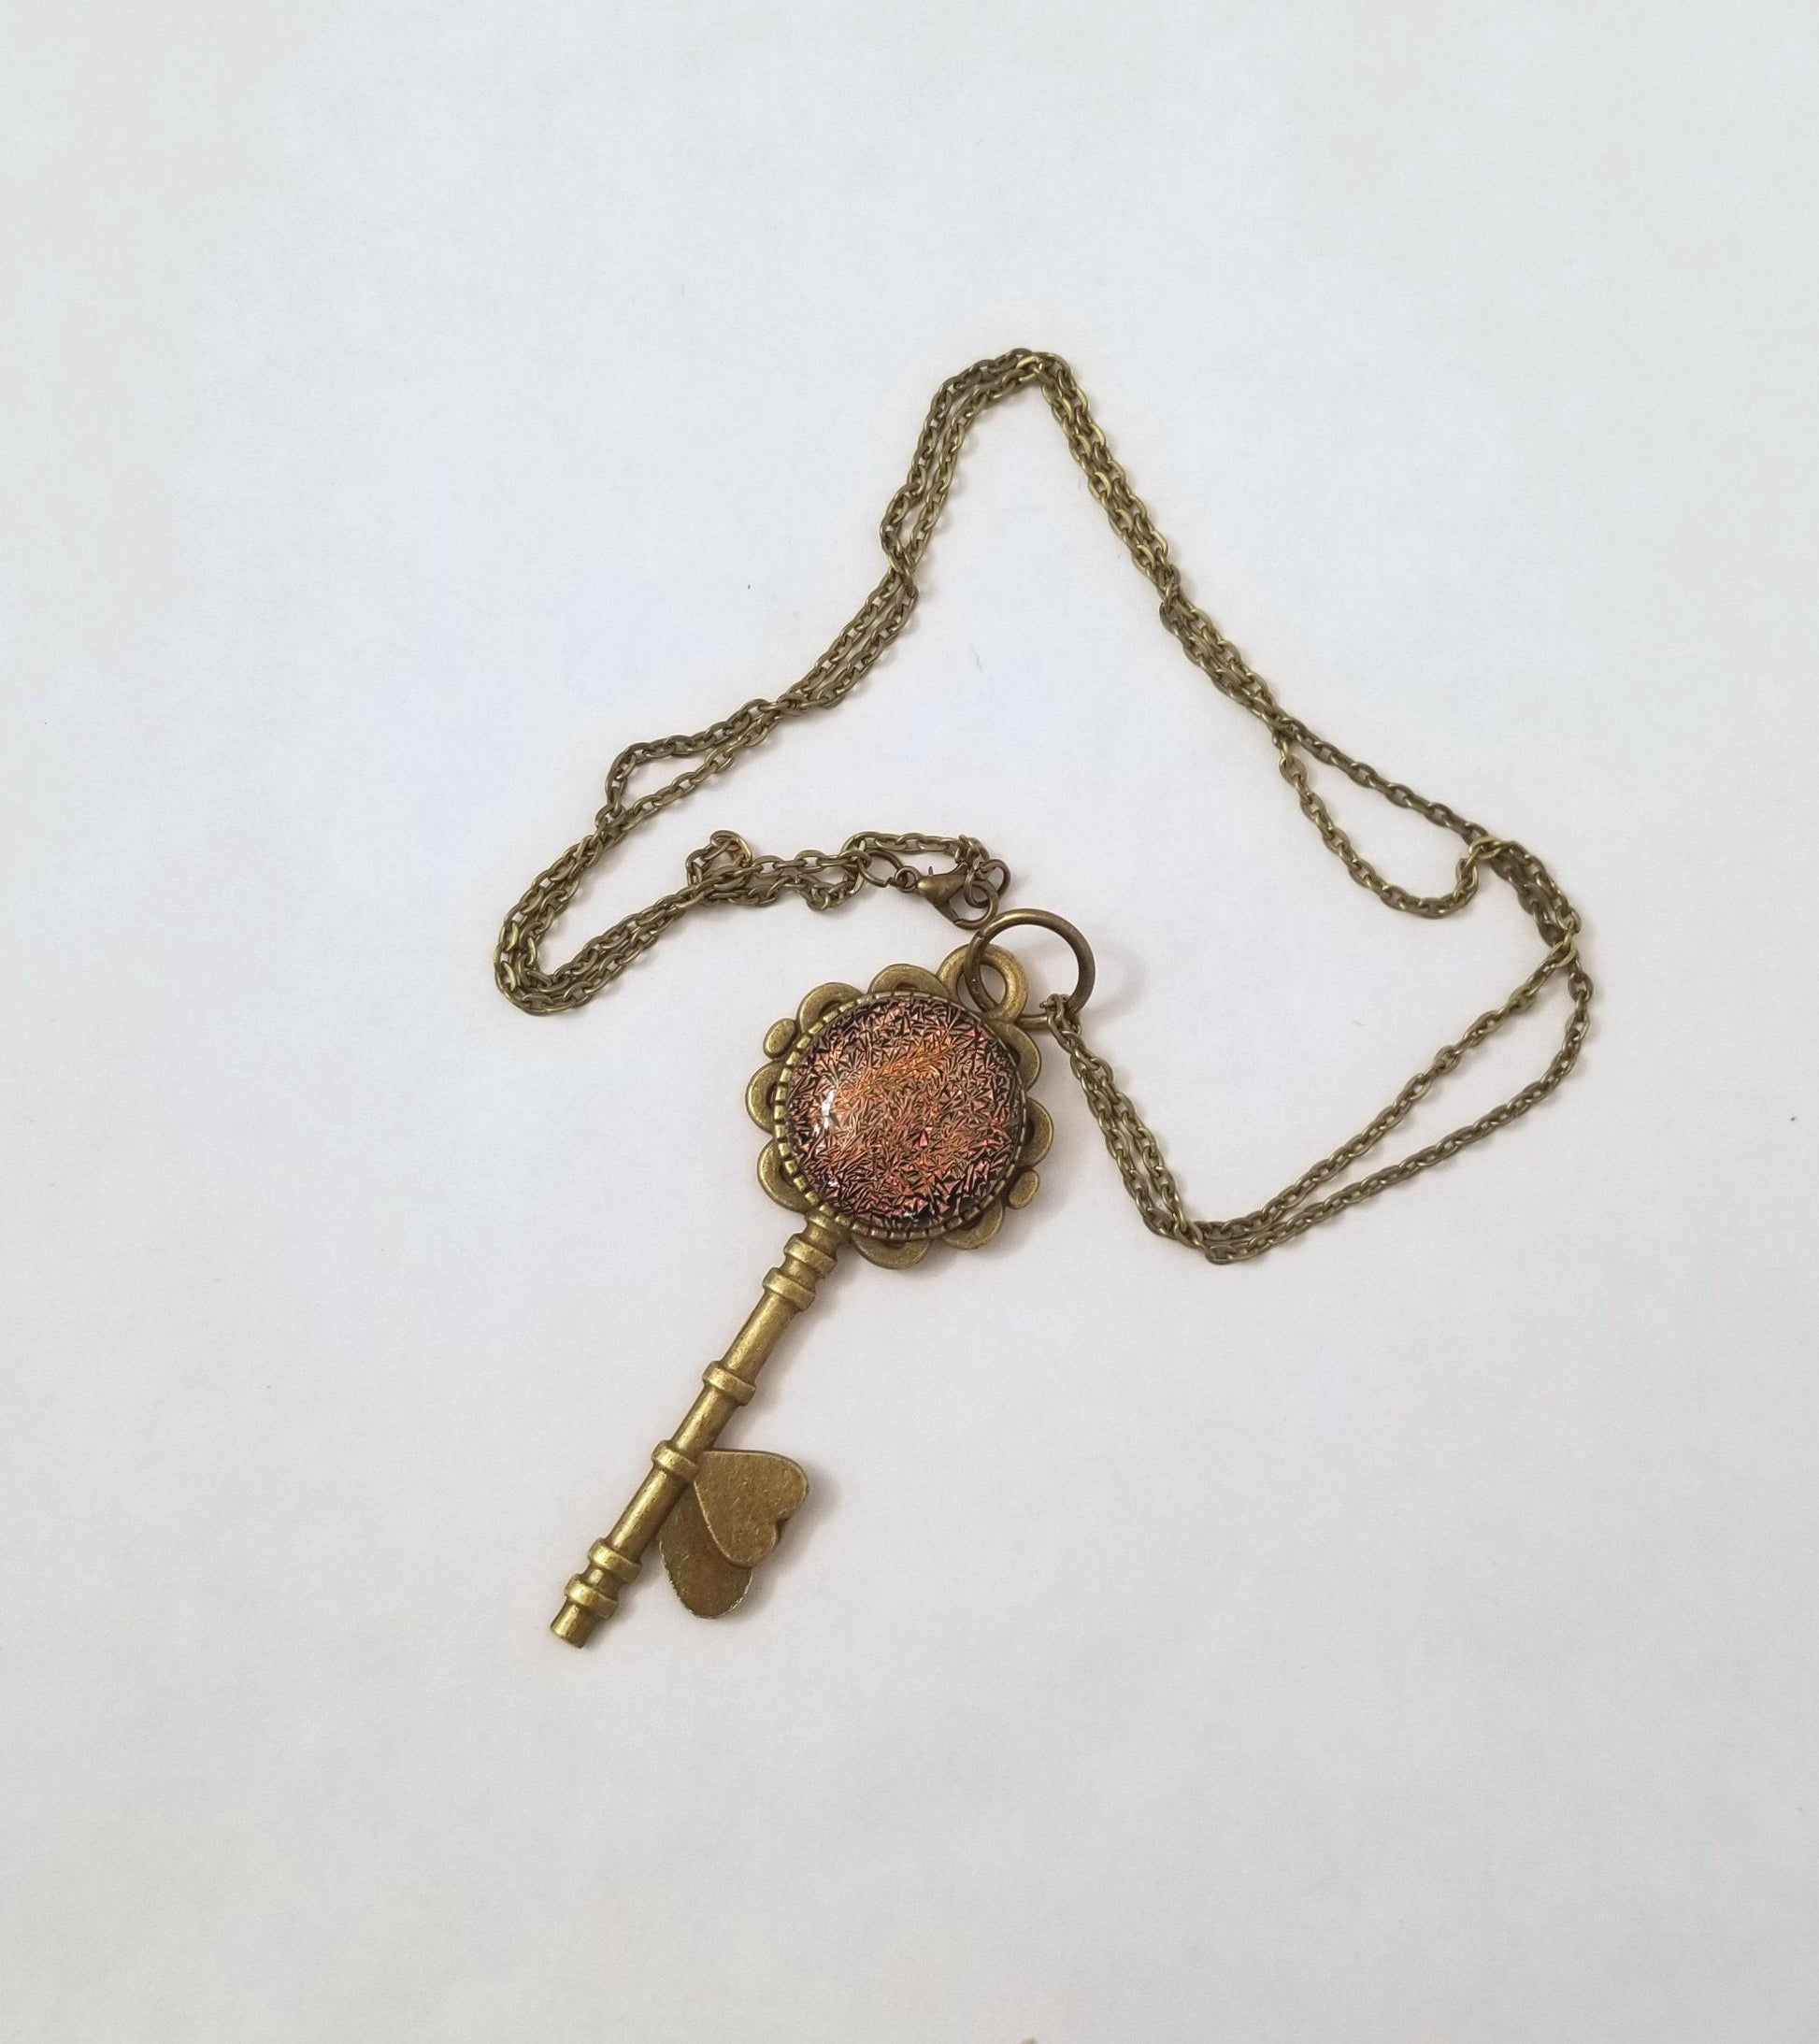 Antiqued Brass  Flowered Skeleton Key with Fused Glass Orange Dichroic cabochon on 24 inch brass plated chain. seeds glassworks. seedsglassworks